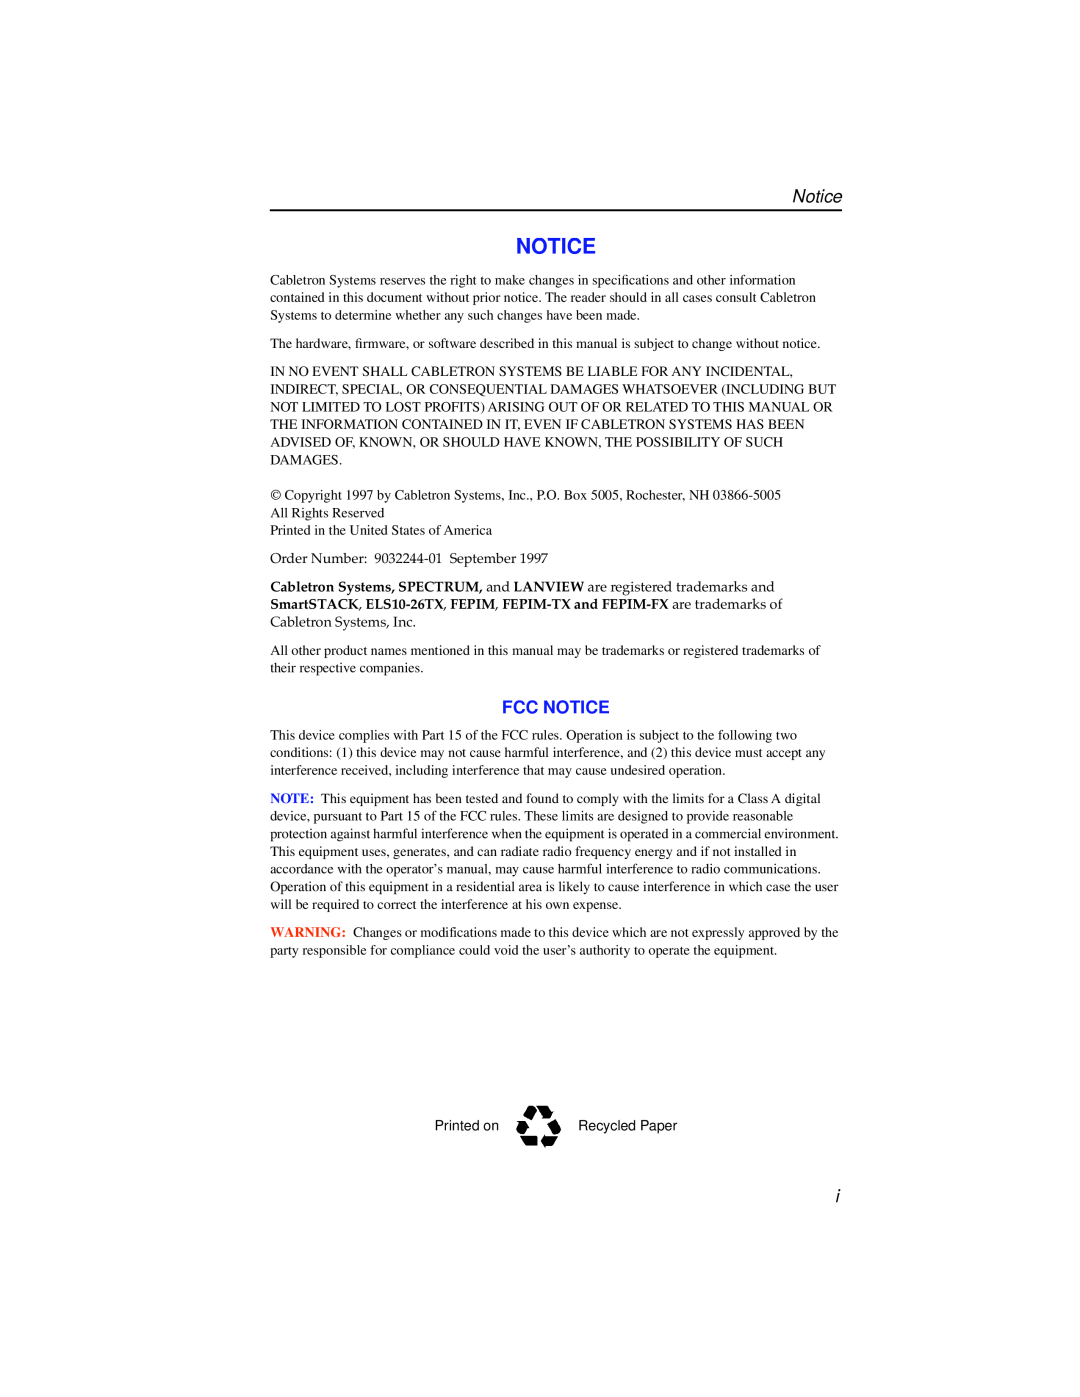 Cabletron Systems ELS10-26 manual Fcc Notice 